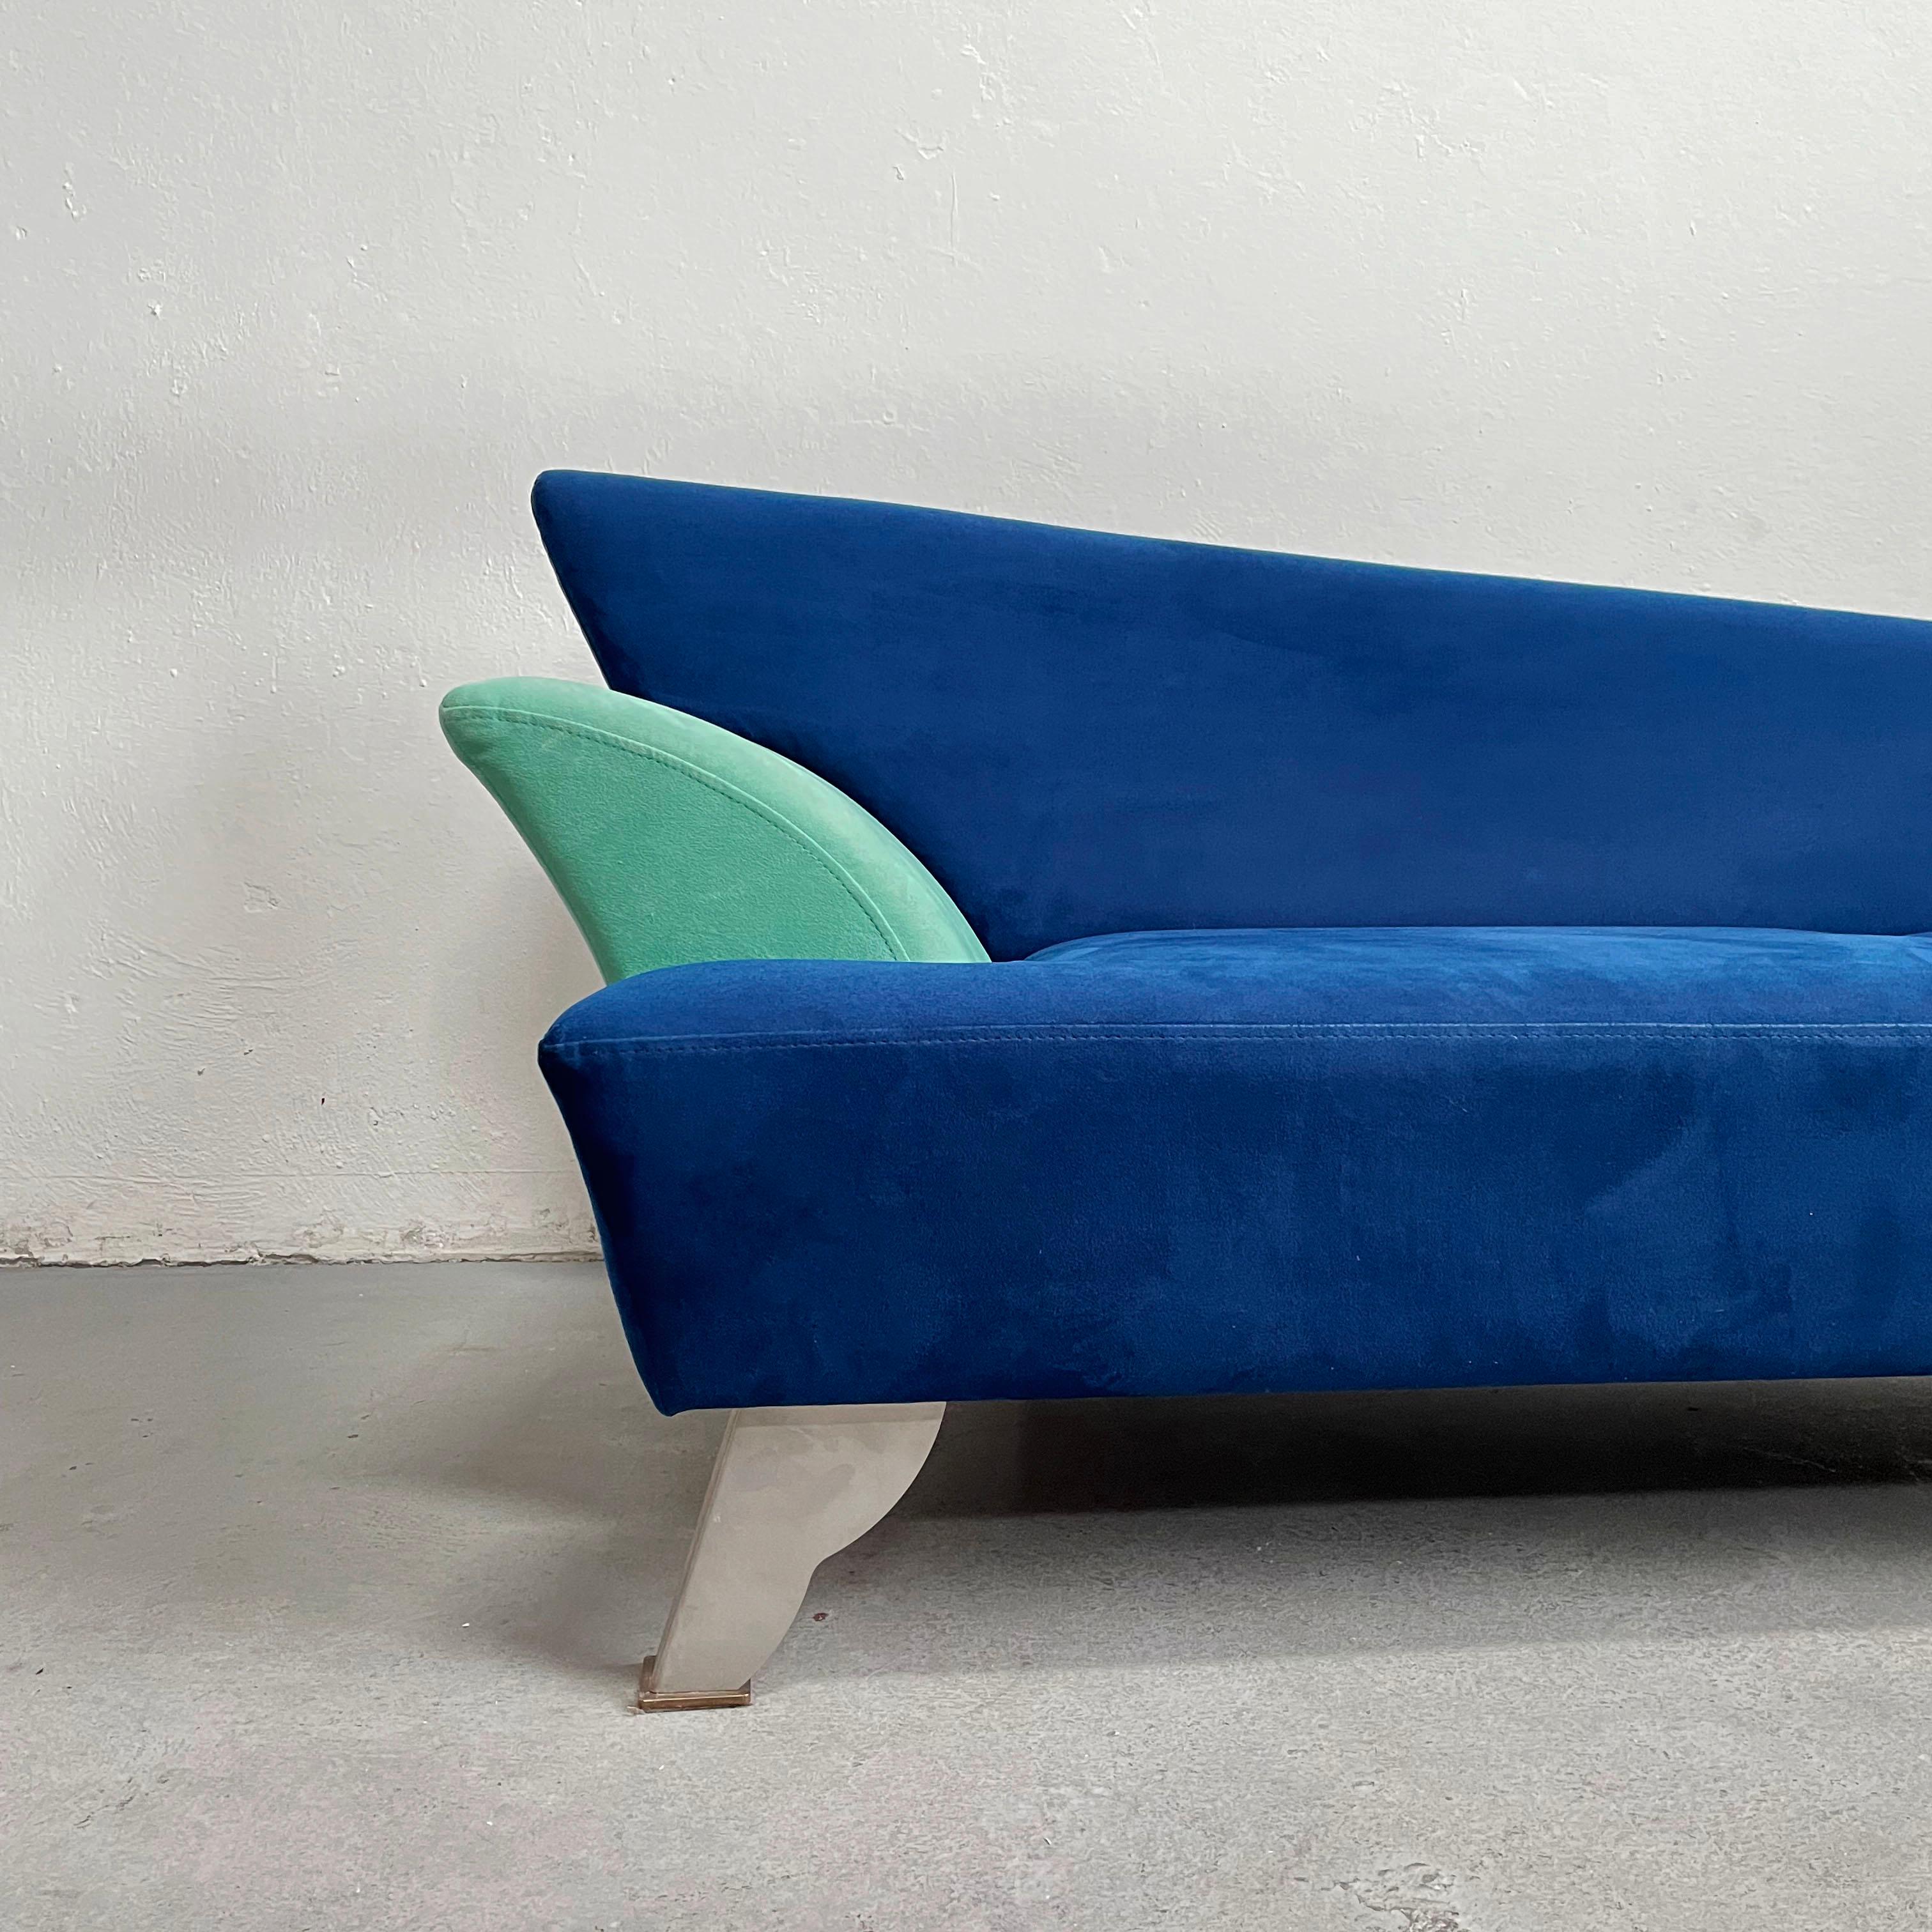 Postmodern sculptural daybed sofa featuring elegantly shaped asymmetrical seating and the 80's style metal legs. The sofa is upholstered in blue Alcantara fabric

Manufactured in the 1980s, era of the Memphis design 

The sofa has minimal traces